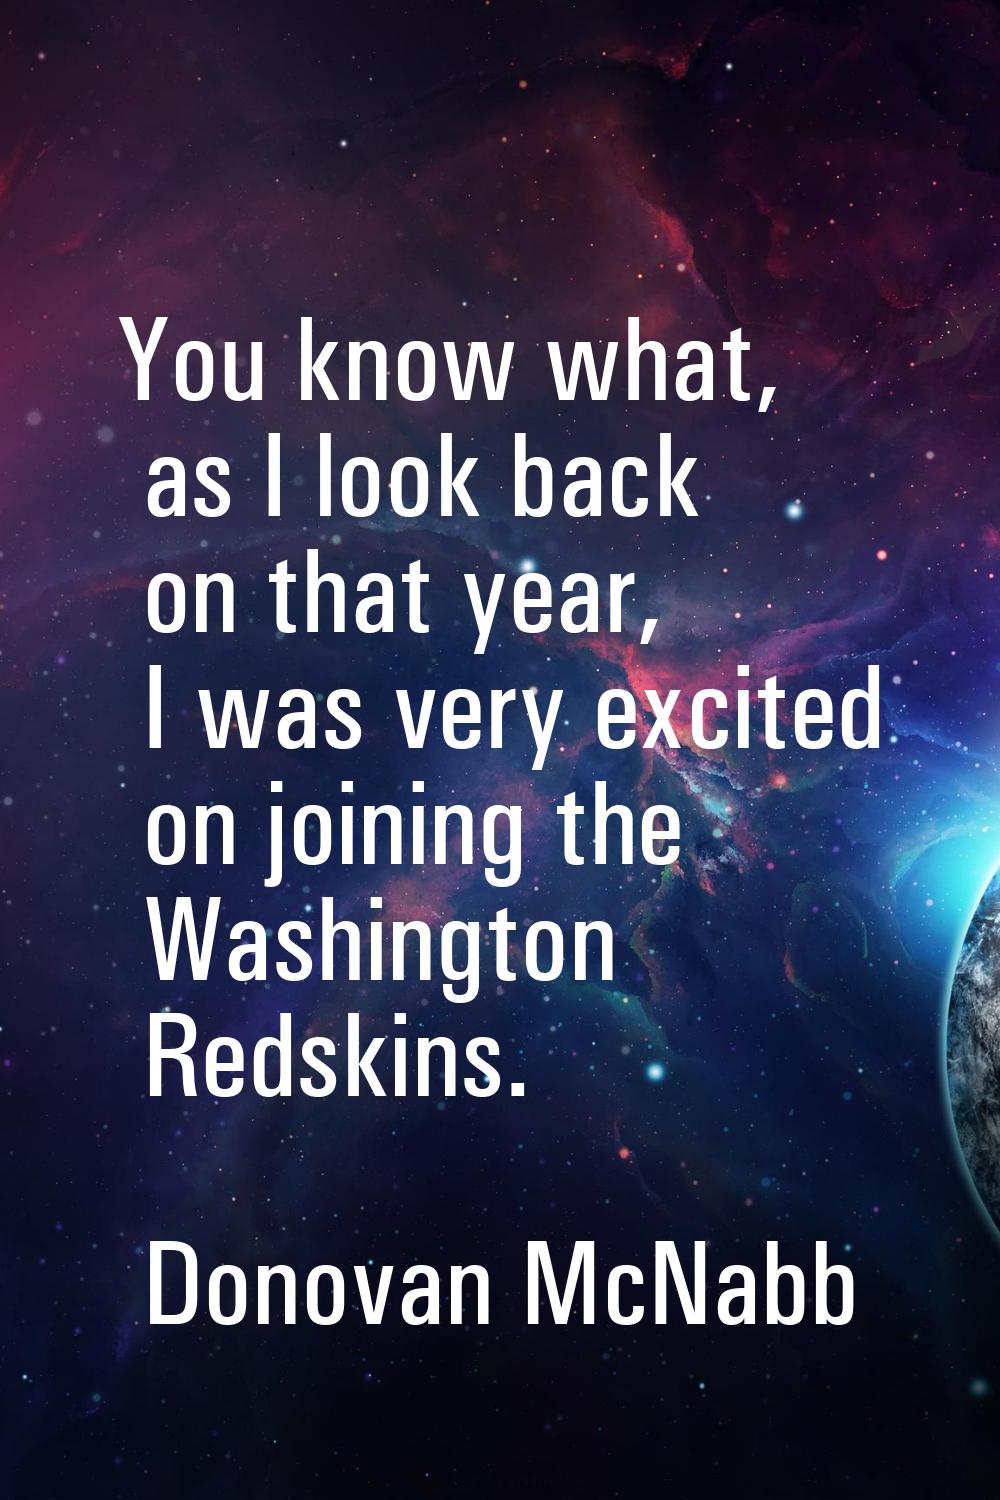 You know what, as I look back on that year, I was very excited on joining the Washington Redskins.